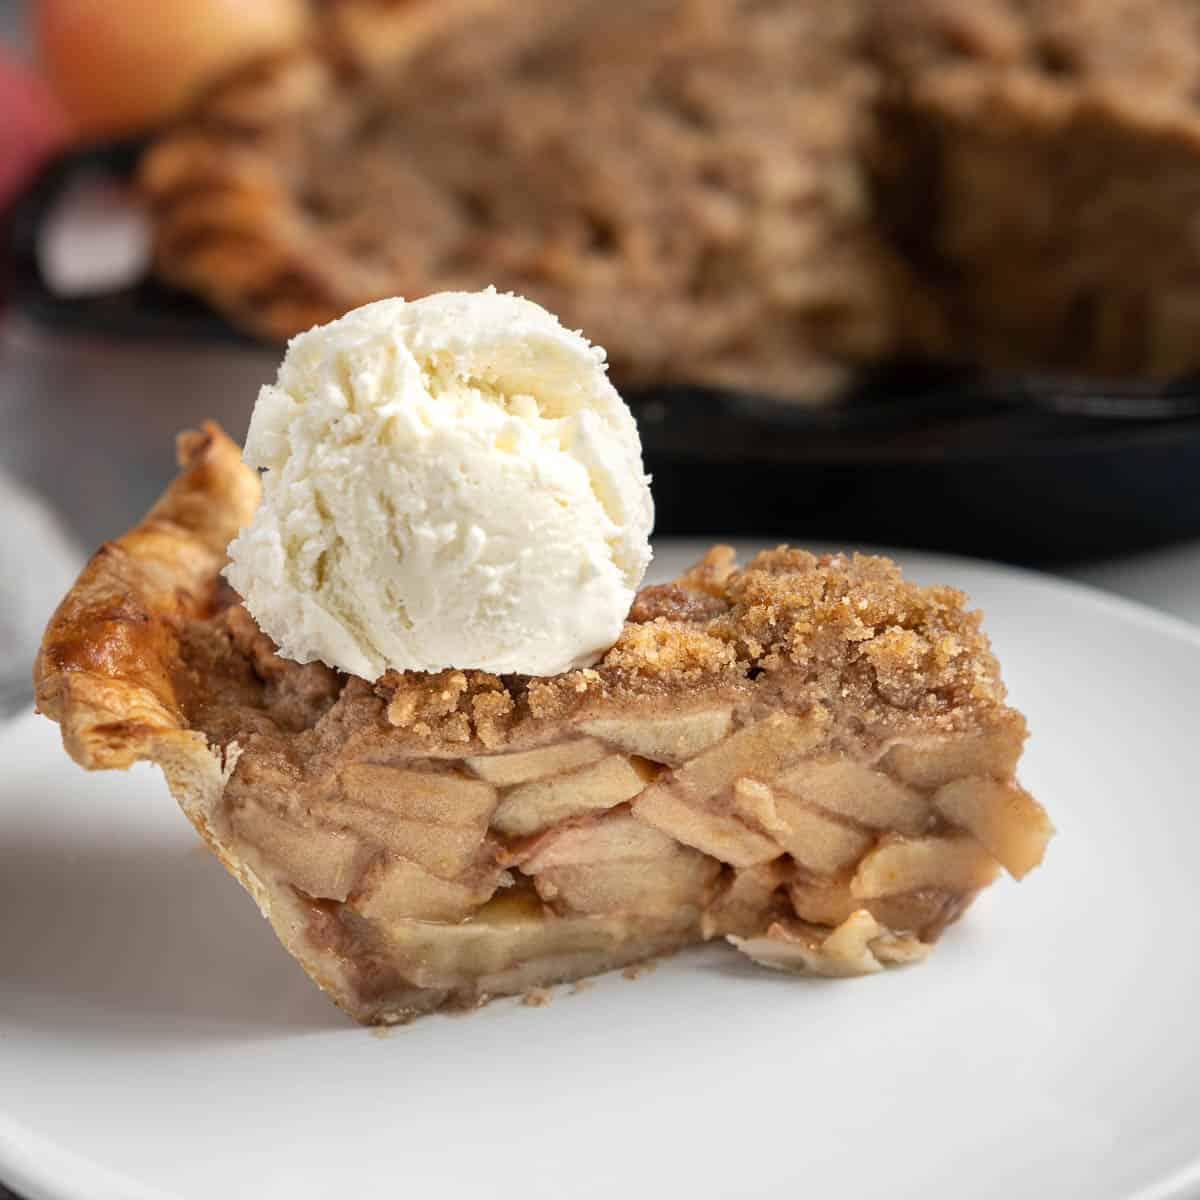 https://www.vindulge.com/wp-content/uploads/2023/11/Skillet-Apple-Pie-cooked-on-the-Grill-FI.jpg